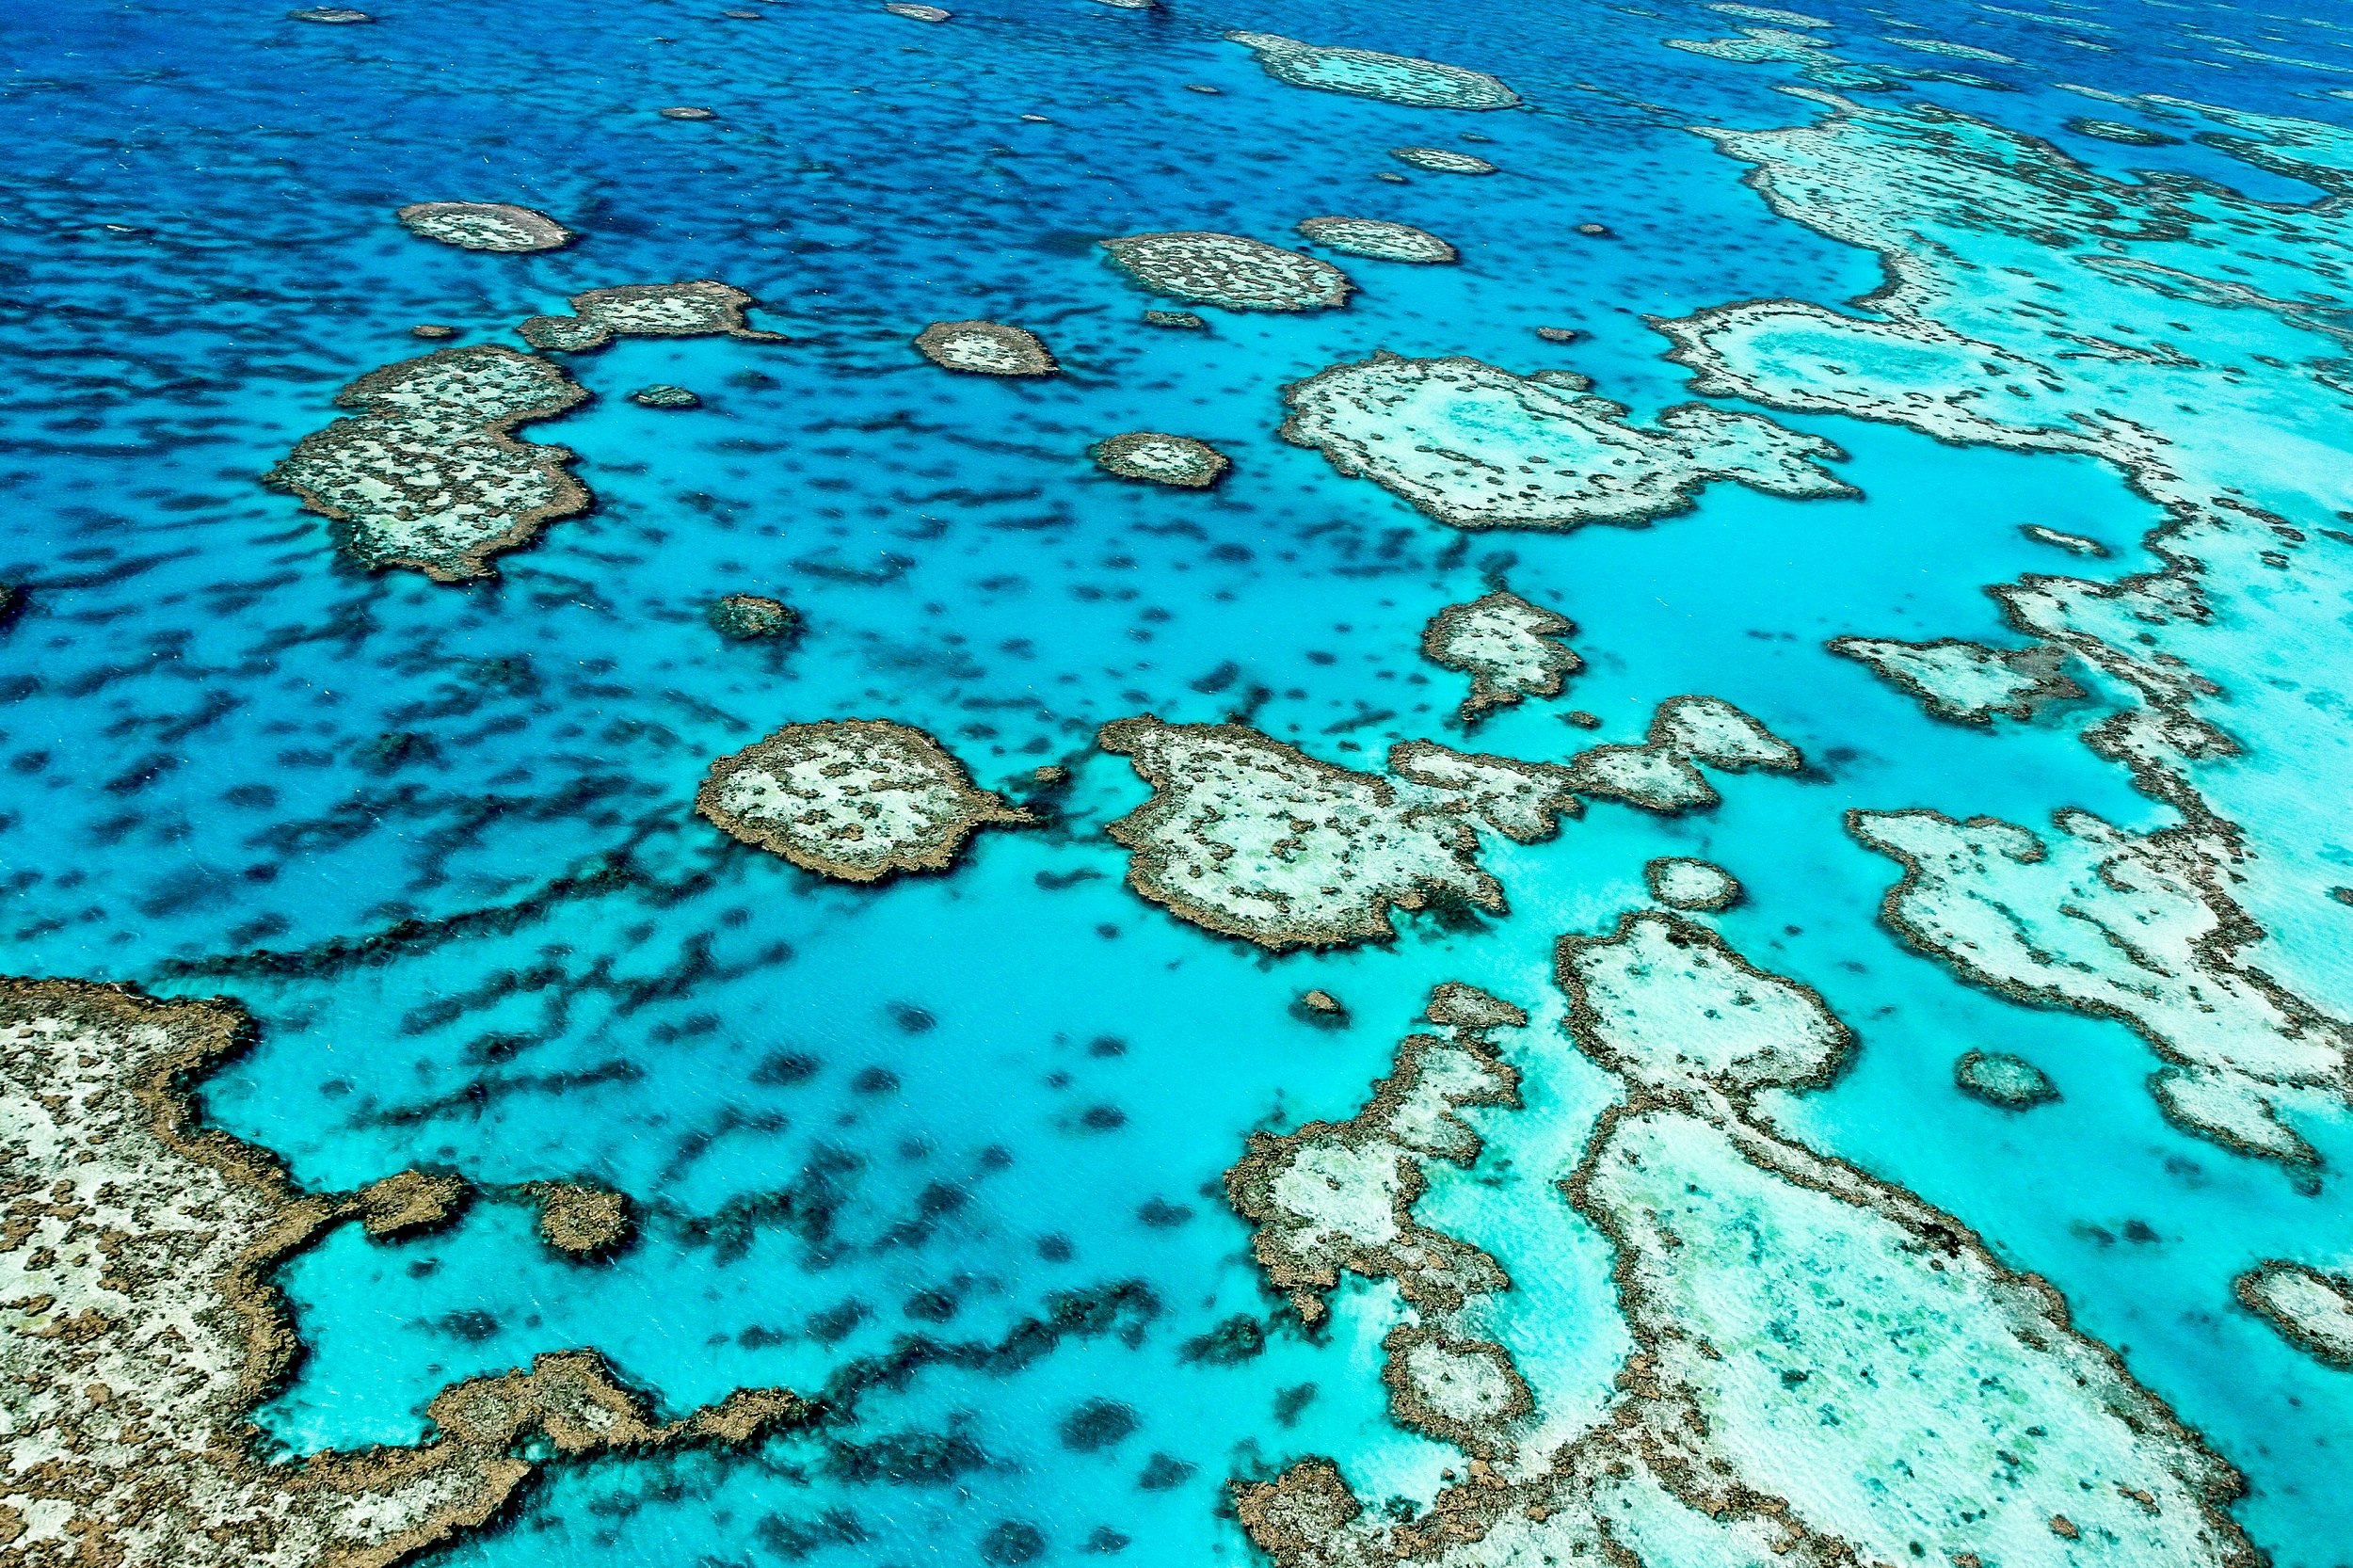 An aerial shot of patches of coral in a clear blue-green sea.